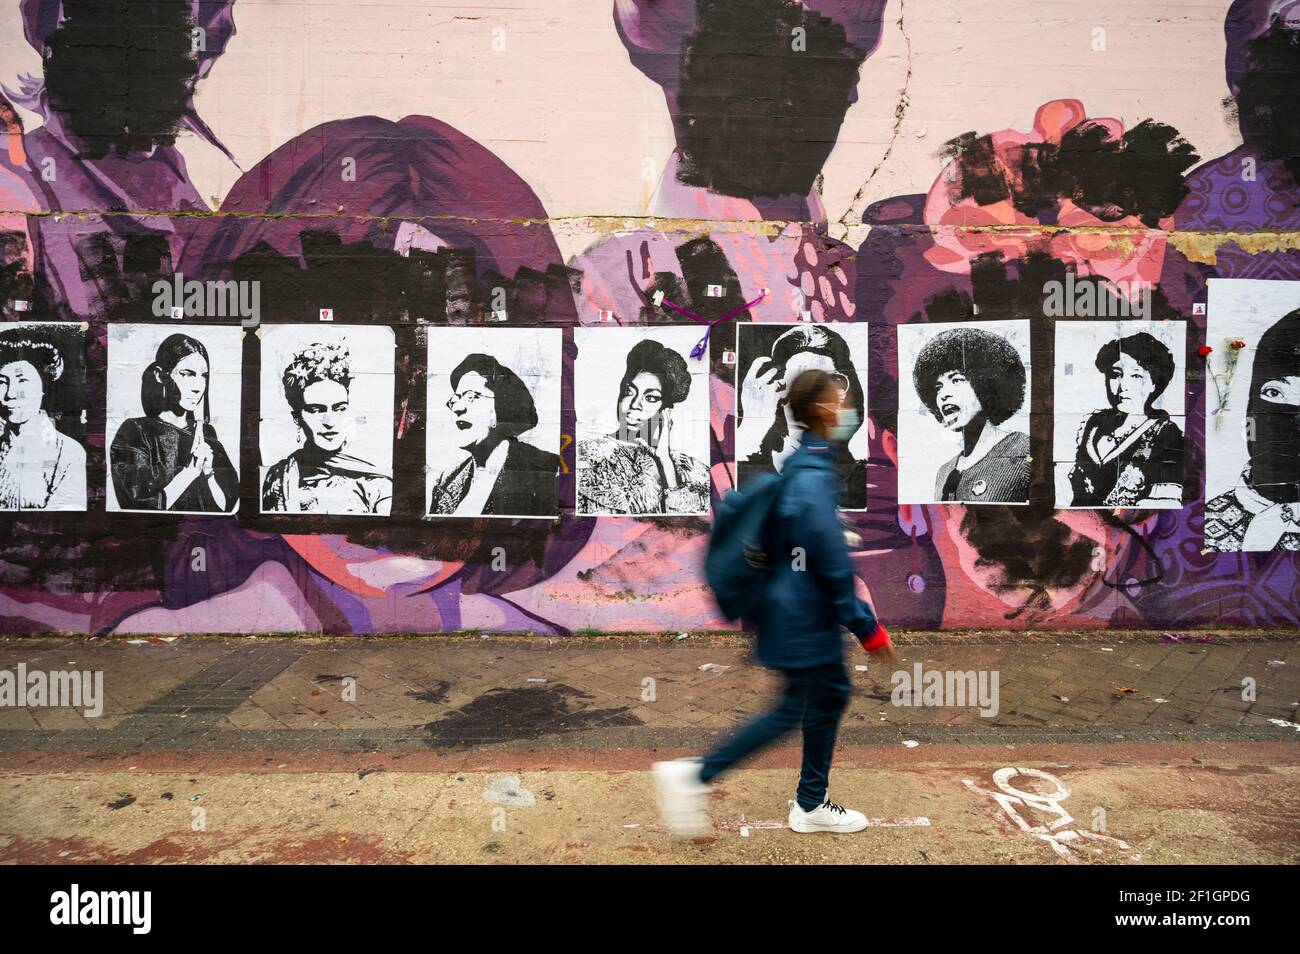 Madrid, Spain. 8th March, 2021. A young woman walks past by a feminist mural that appeared today vandalized during International Women's Day. Placards of women have been placed over the paintings after the mural was vandalized with black paint. The mural represents famous women from around the world, with the faces of 15 women who are part of history for their fight in favor of equality: Angela Davis, Frida Kahlo, Nina Simone, Rigoberta Menchu, Lucia Sanchez Saornil, Rosa Arauzo, Valentina Tereshkova, Chimamanda Ngozi, Emma Goldman, Kanno Sugato, Liudmila Pavlichenko, Billy Jean King, Gata Cat Stock Photo